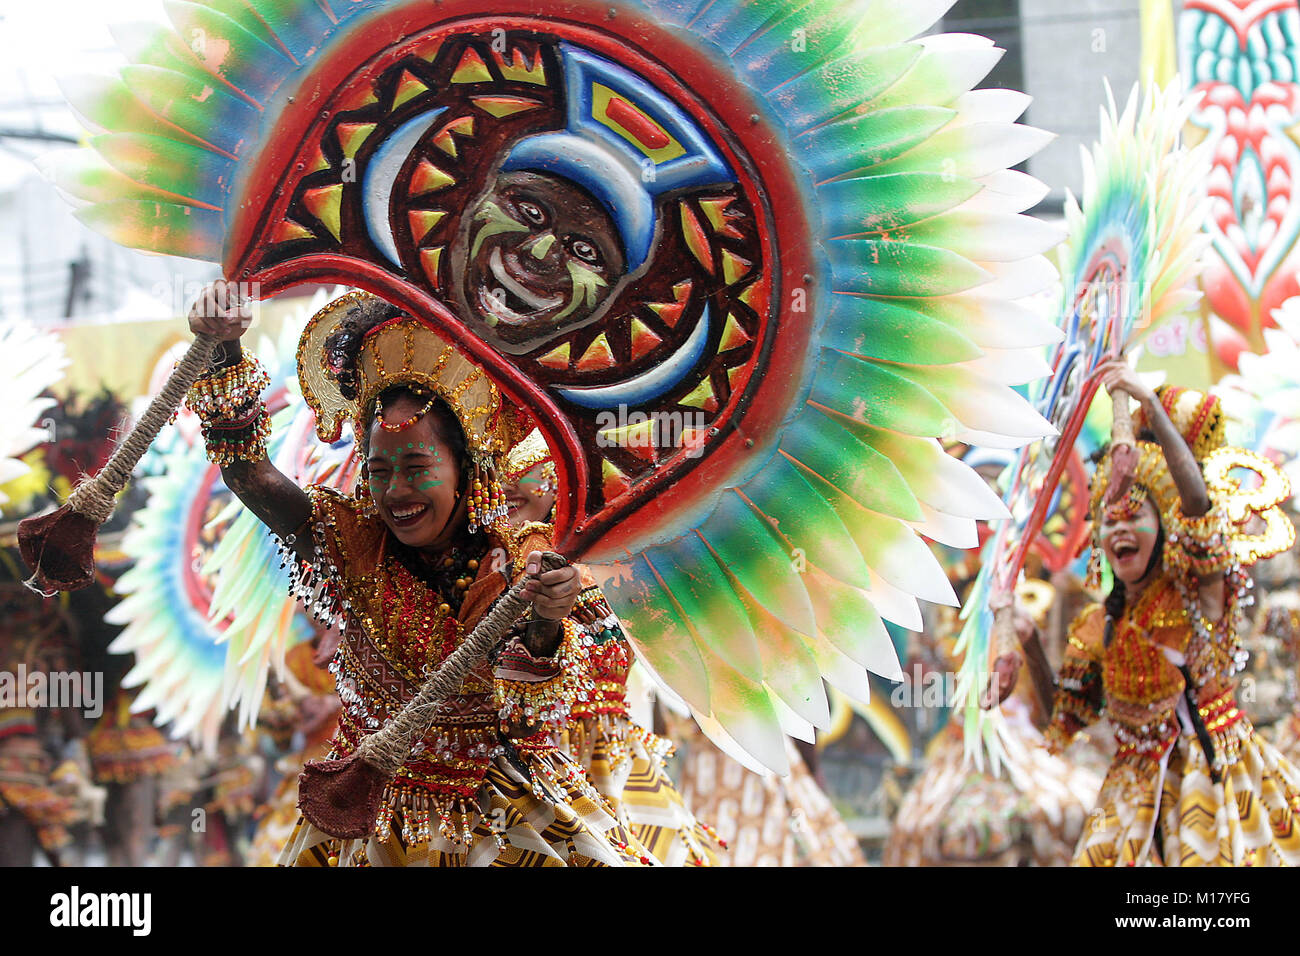 Iloilo, Philippines. 28th Jan, 2018. Dancers wearing colorful costumes and body paint perform during the 50th Dinagyang Festival in Iloilo Province, the Philippines, Jan. 28, 2018. Credit: Stringer/Xinhua/Alamy Live News Stock Photo